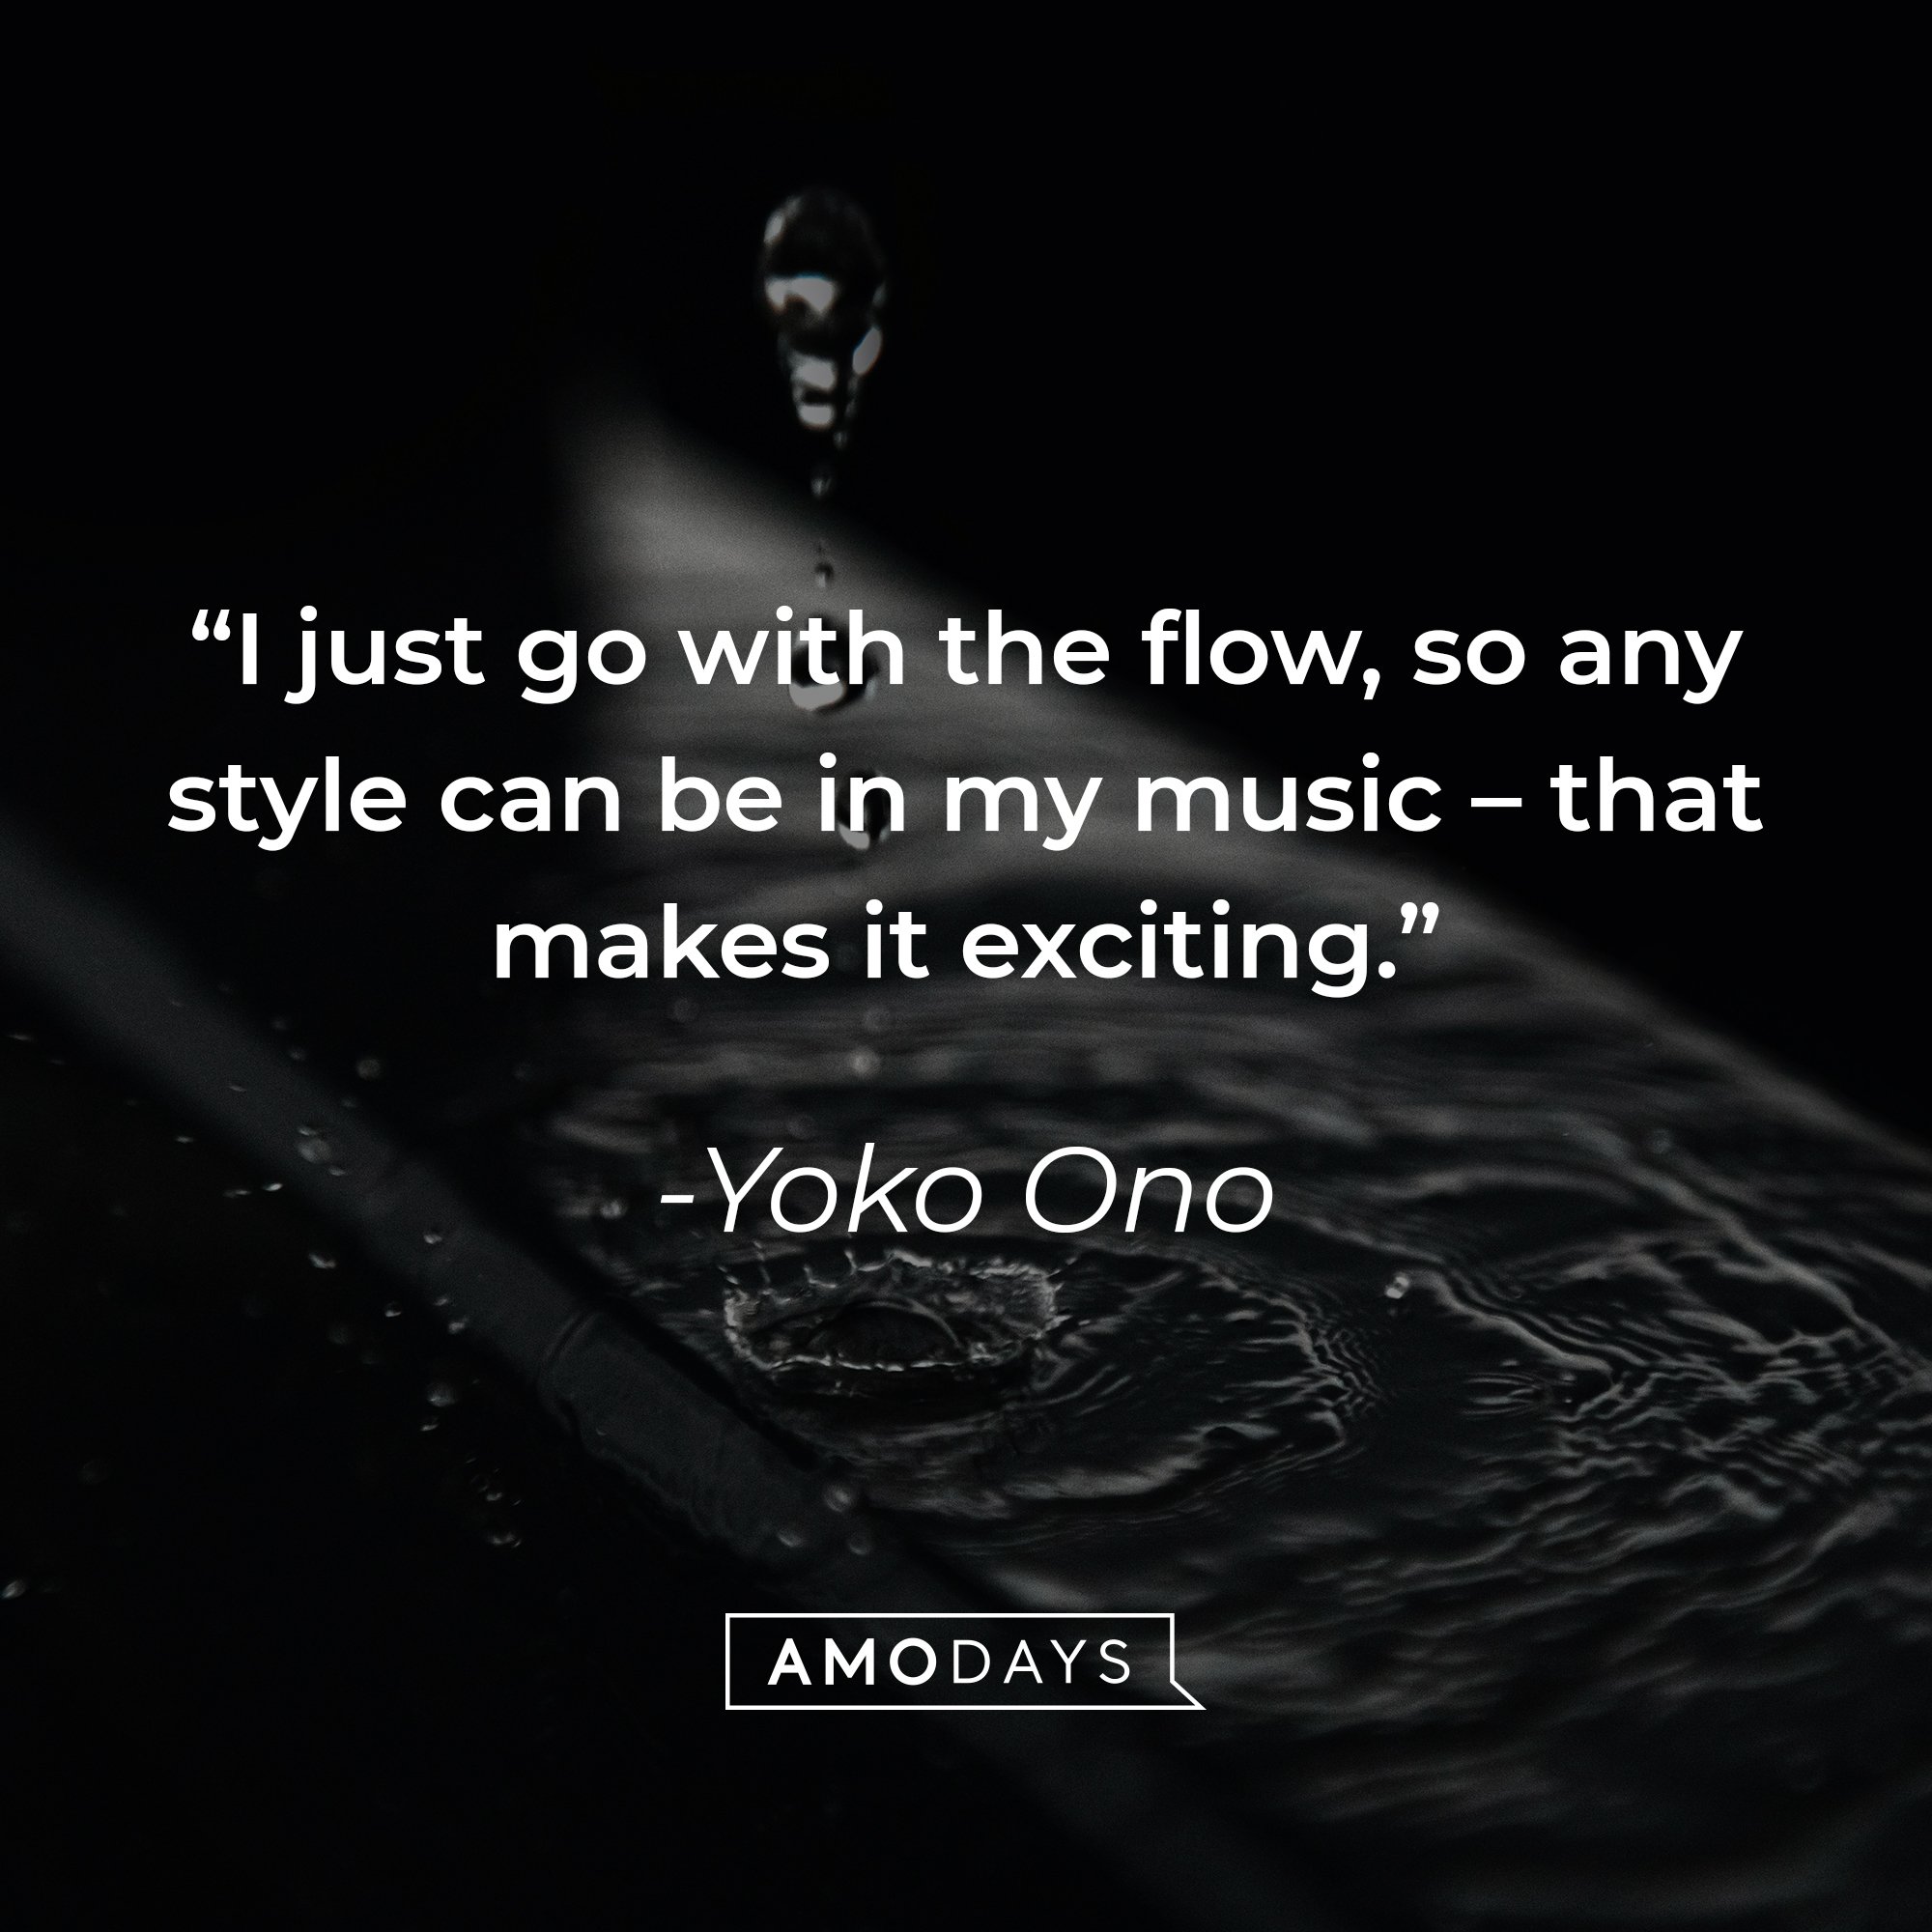 Yoko Ono's quote: "I just go with the flow, so any style can be in my music – that makes it exciting." | Image: AmoDays